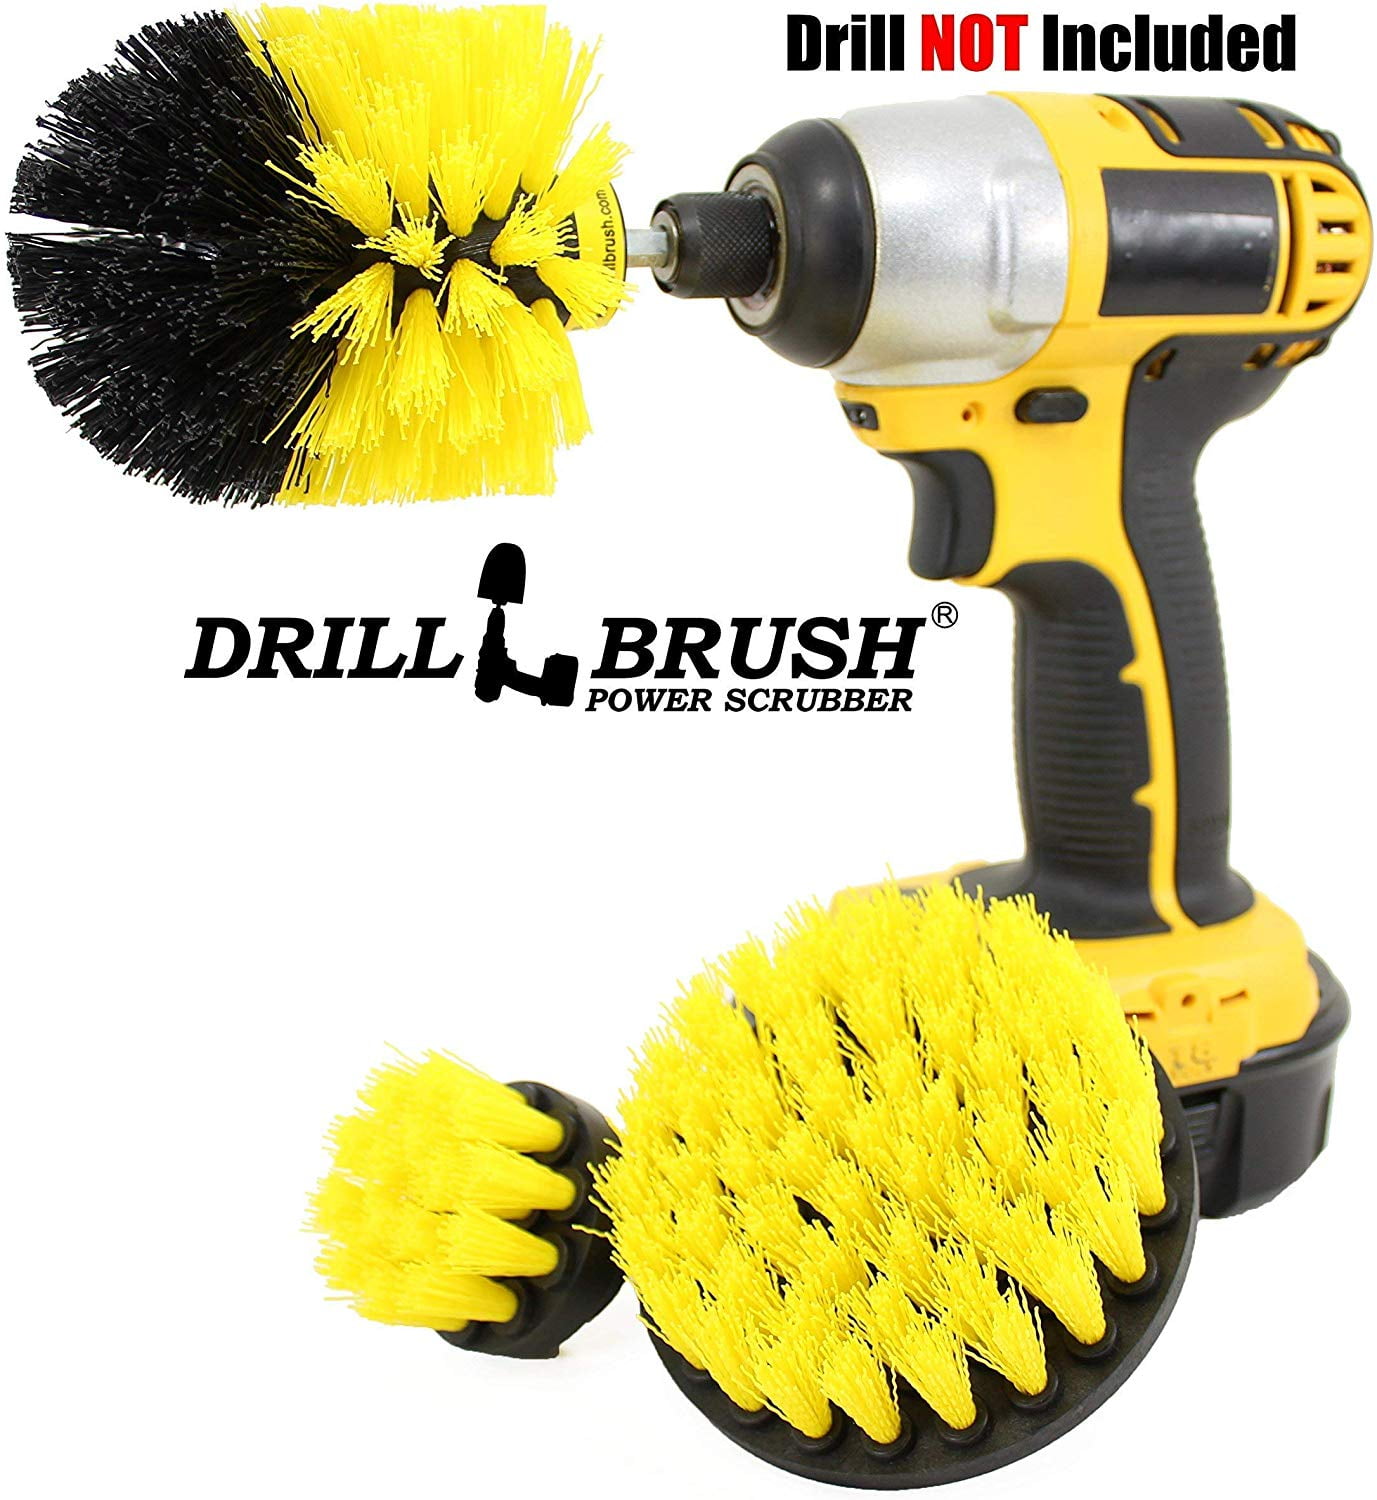 CSSD Scrub Brush Drill Attachment Kits Kitchen Sink Auto Tires,8Pcs Cleaning Brush Set Toilet Tile Home All Purpose Drills Brush Heads for Daily Cleaning Activities Tub Grout 